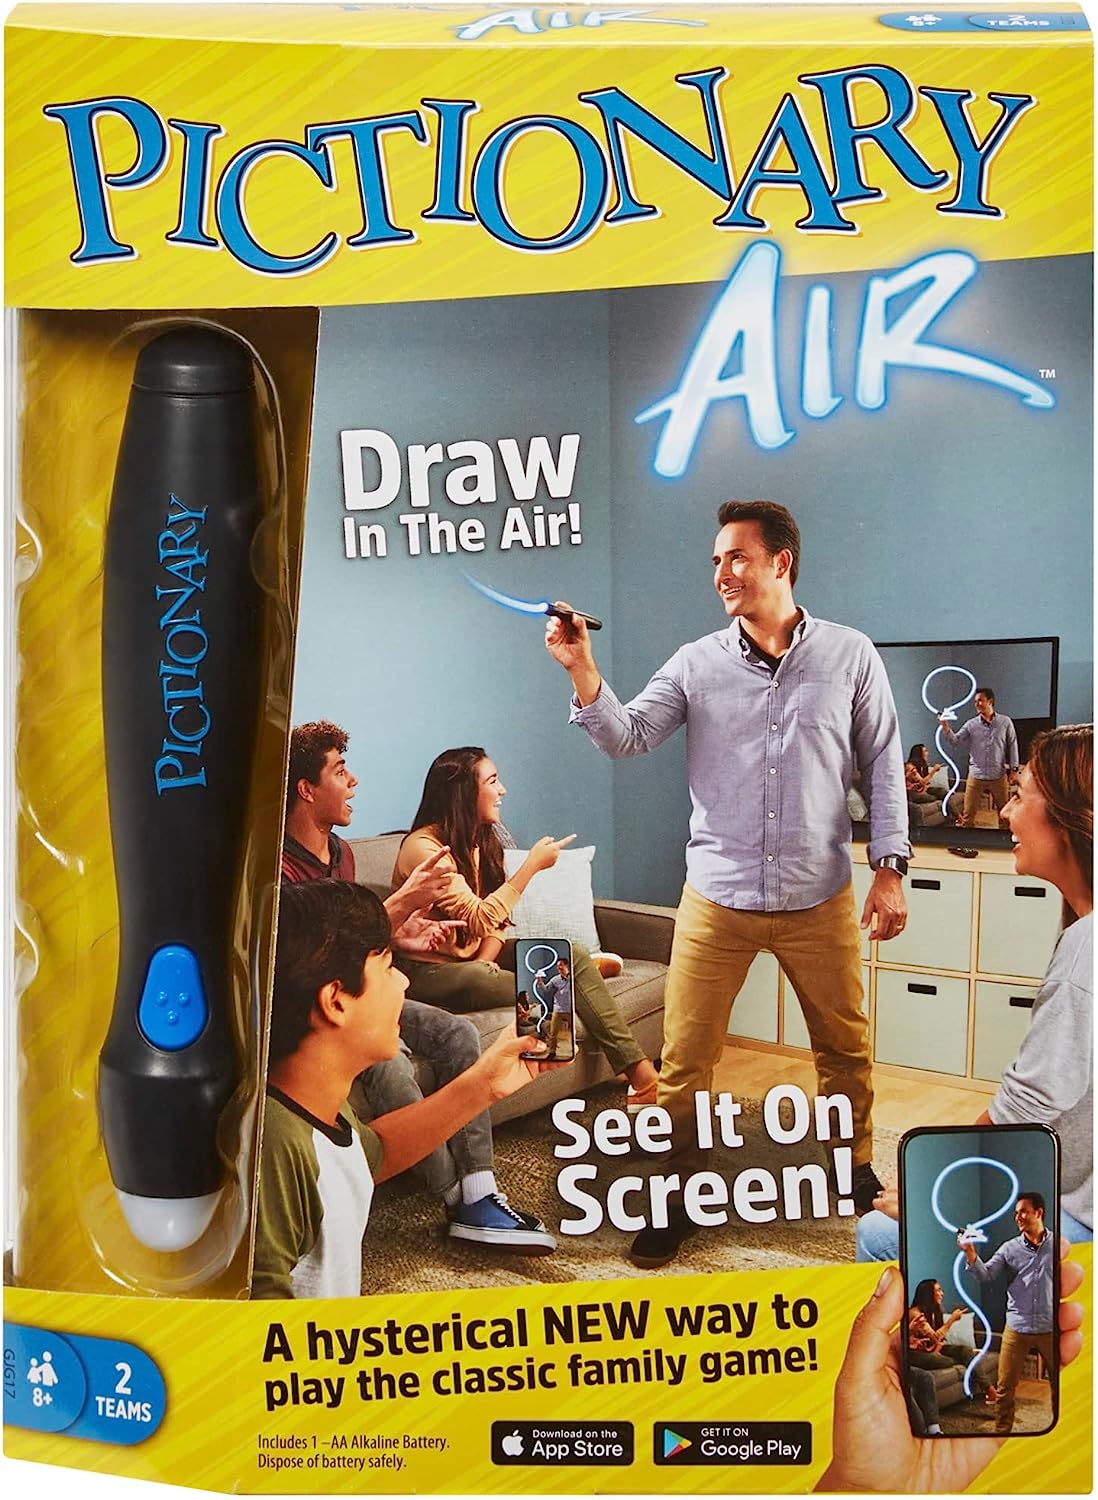 Pictionary Air, Mattel Games, Family drawing game, Links to Smart Devices, 8 years old and up, GJG17